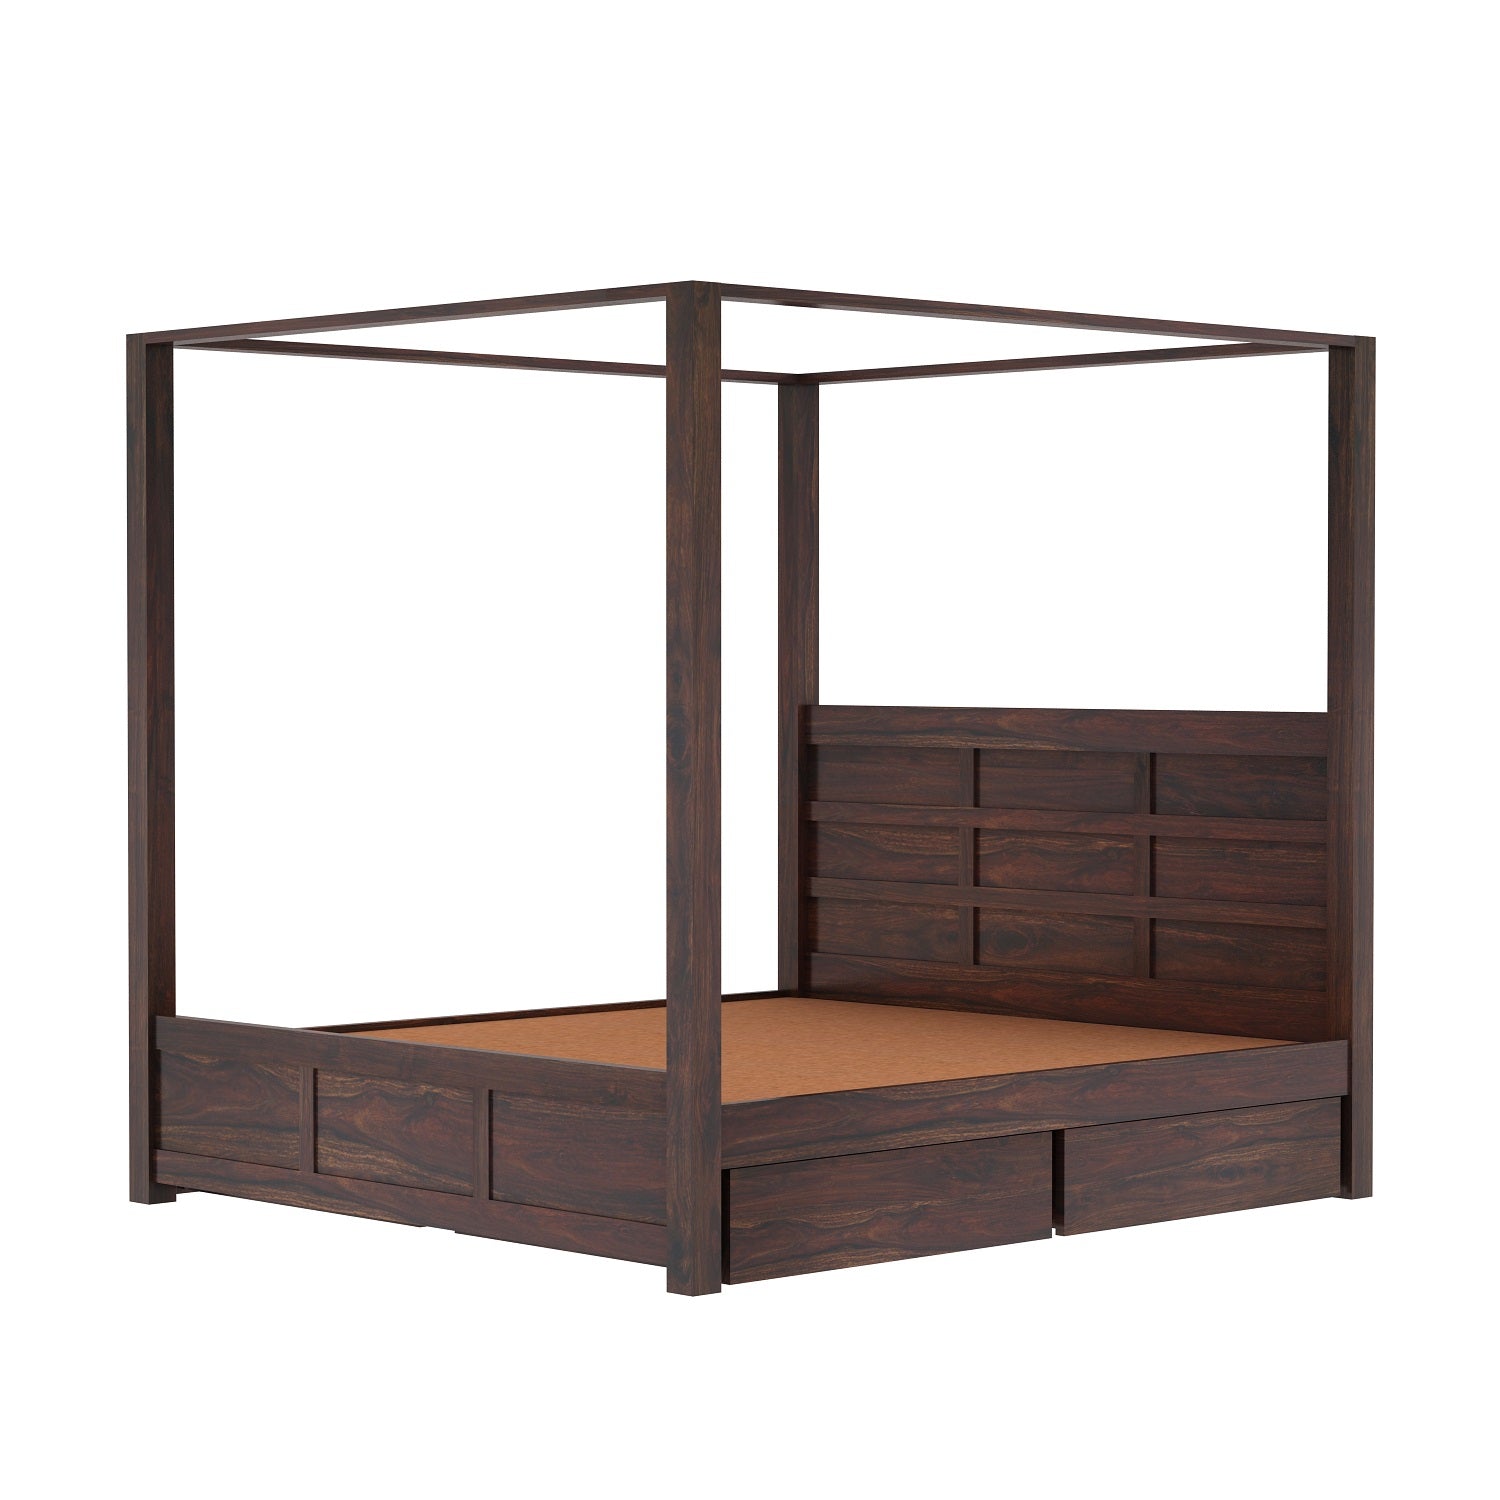 Woodwing Solid Sheesham Wood Poster Bed With Four Drawers (King Size, Walnut Finish)